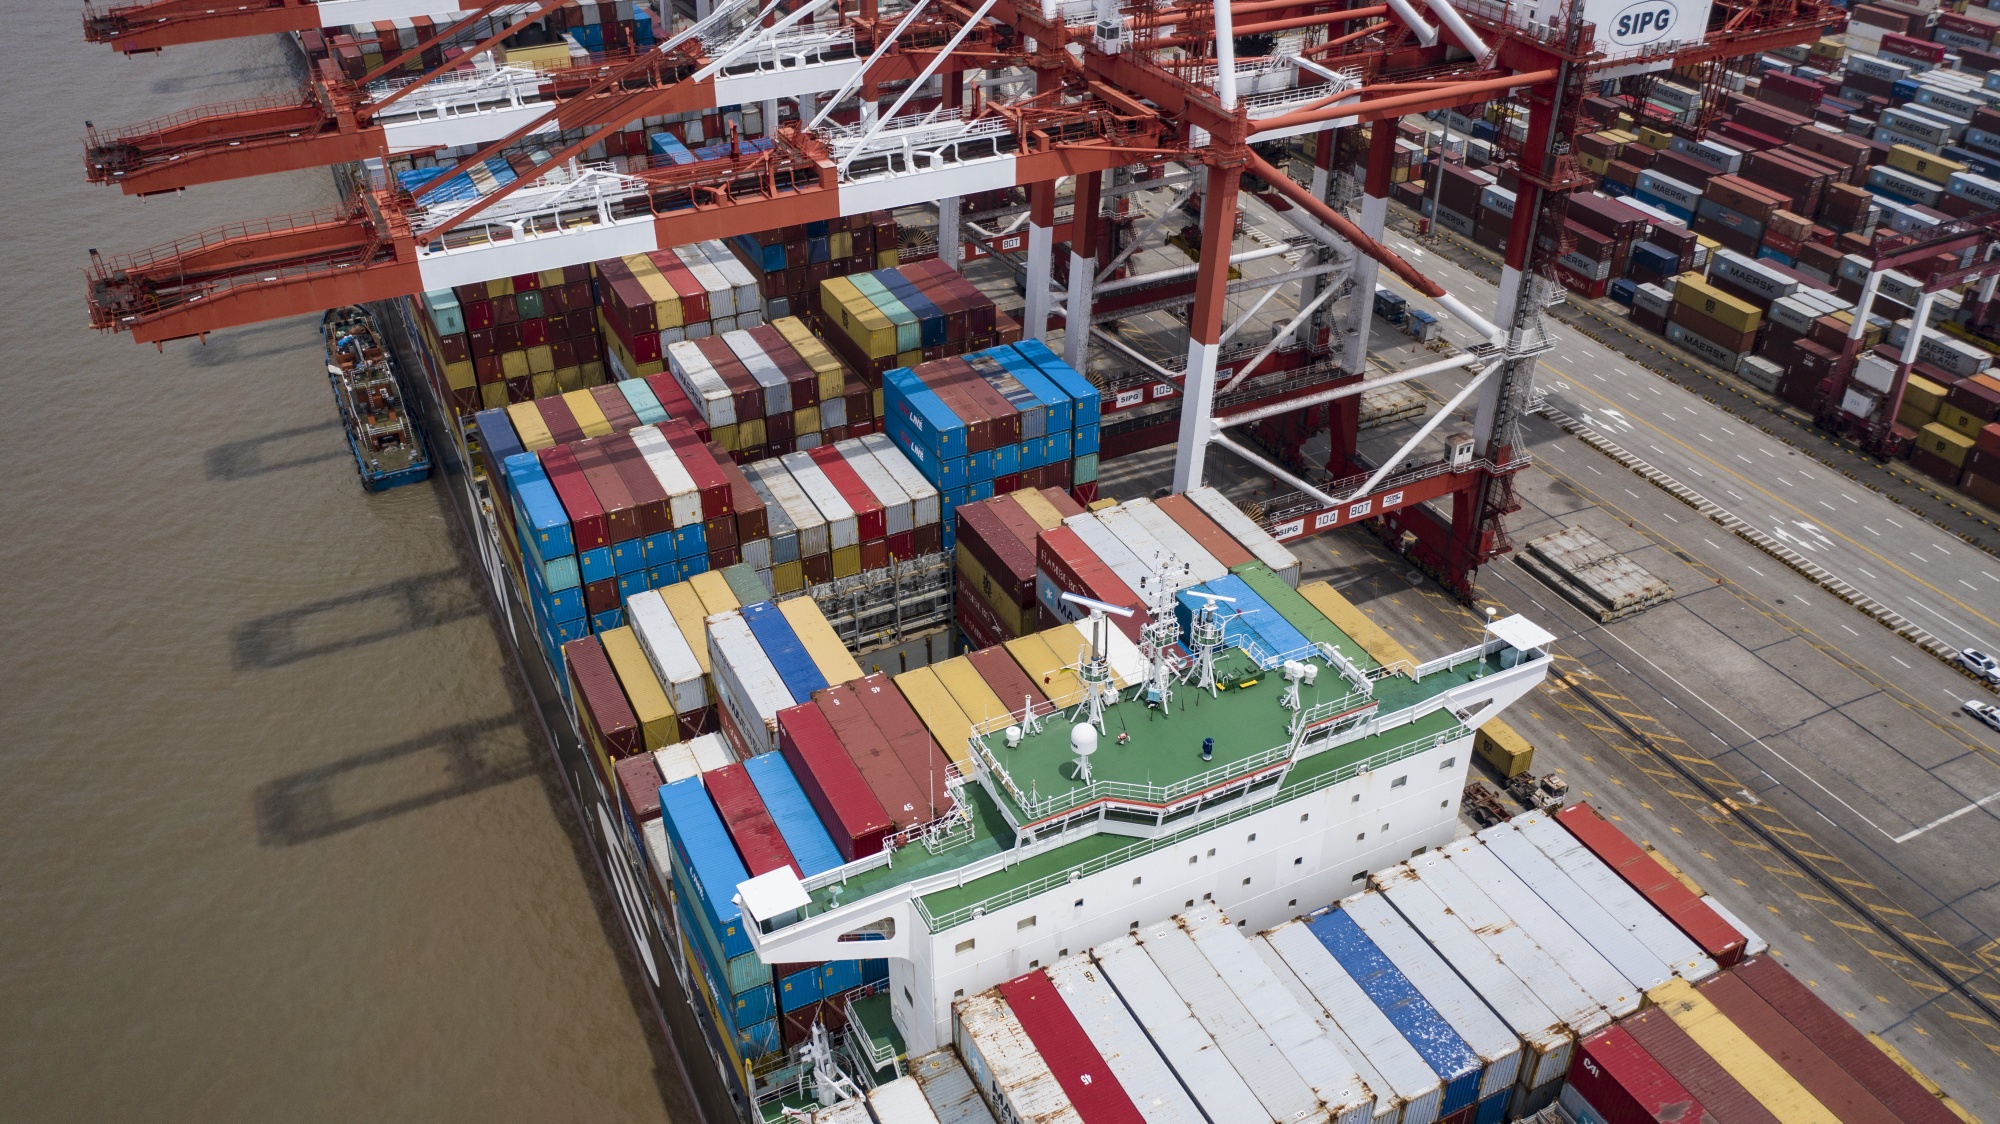 A vessel loaded with shipping containers is docked at the Yangshan Deepwater Port in this aerial photograph taken in Shanghai.